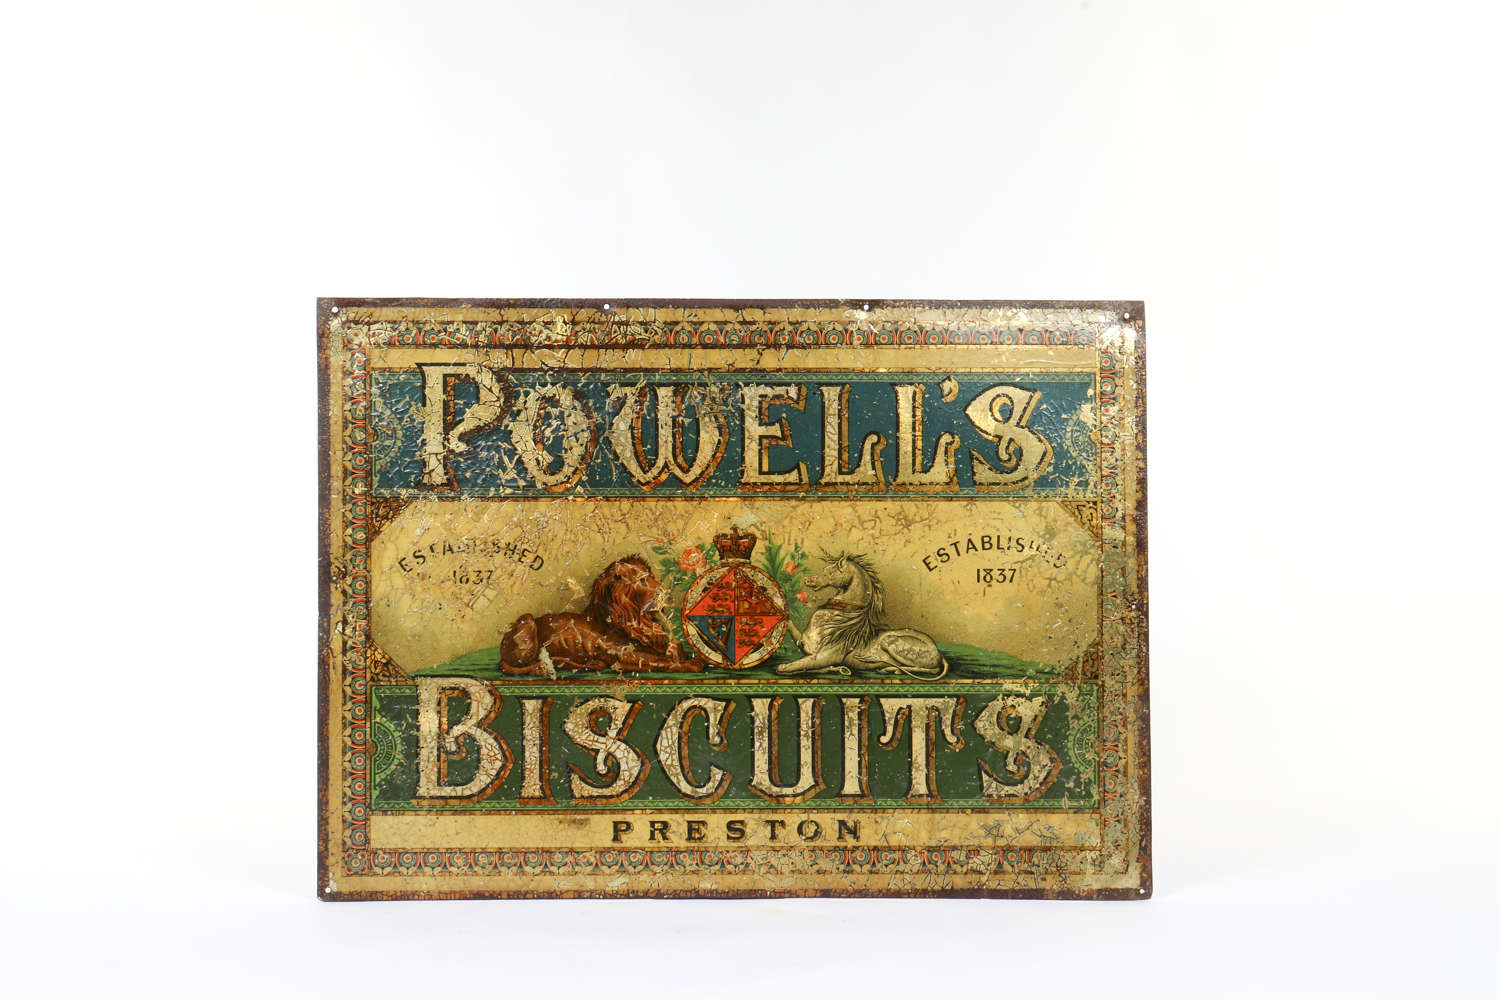 Original tin advertising sign for Powell's Biscuits